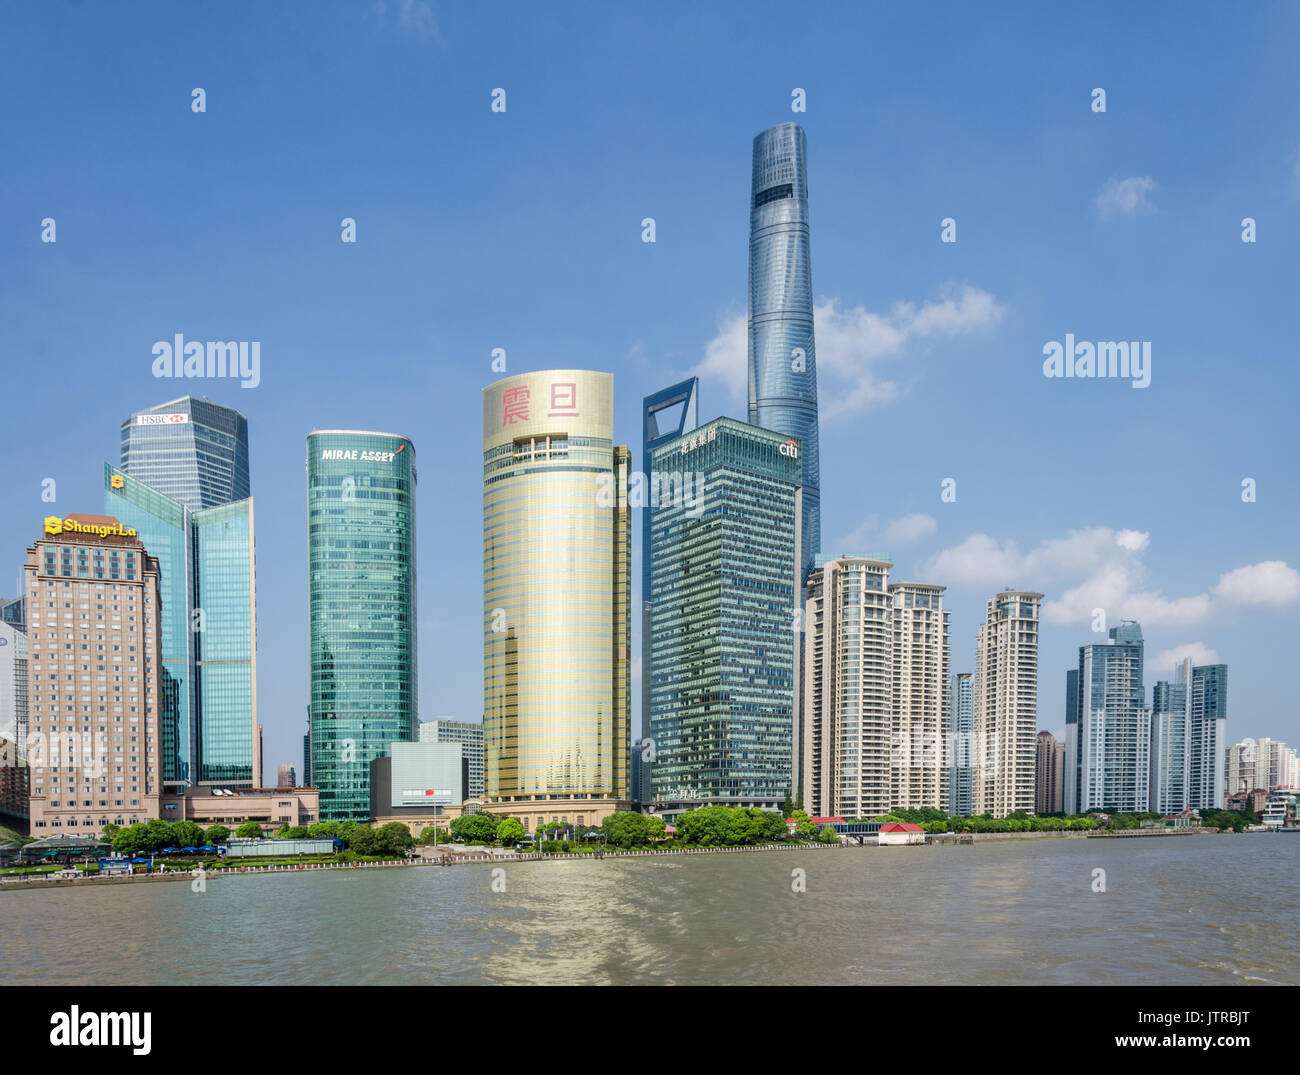 Looking across the Huangpu River at the skyscrapers in the Lujiazui Finance District in Pudong, Shanghai, China. Stock Photo